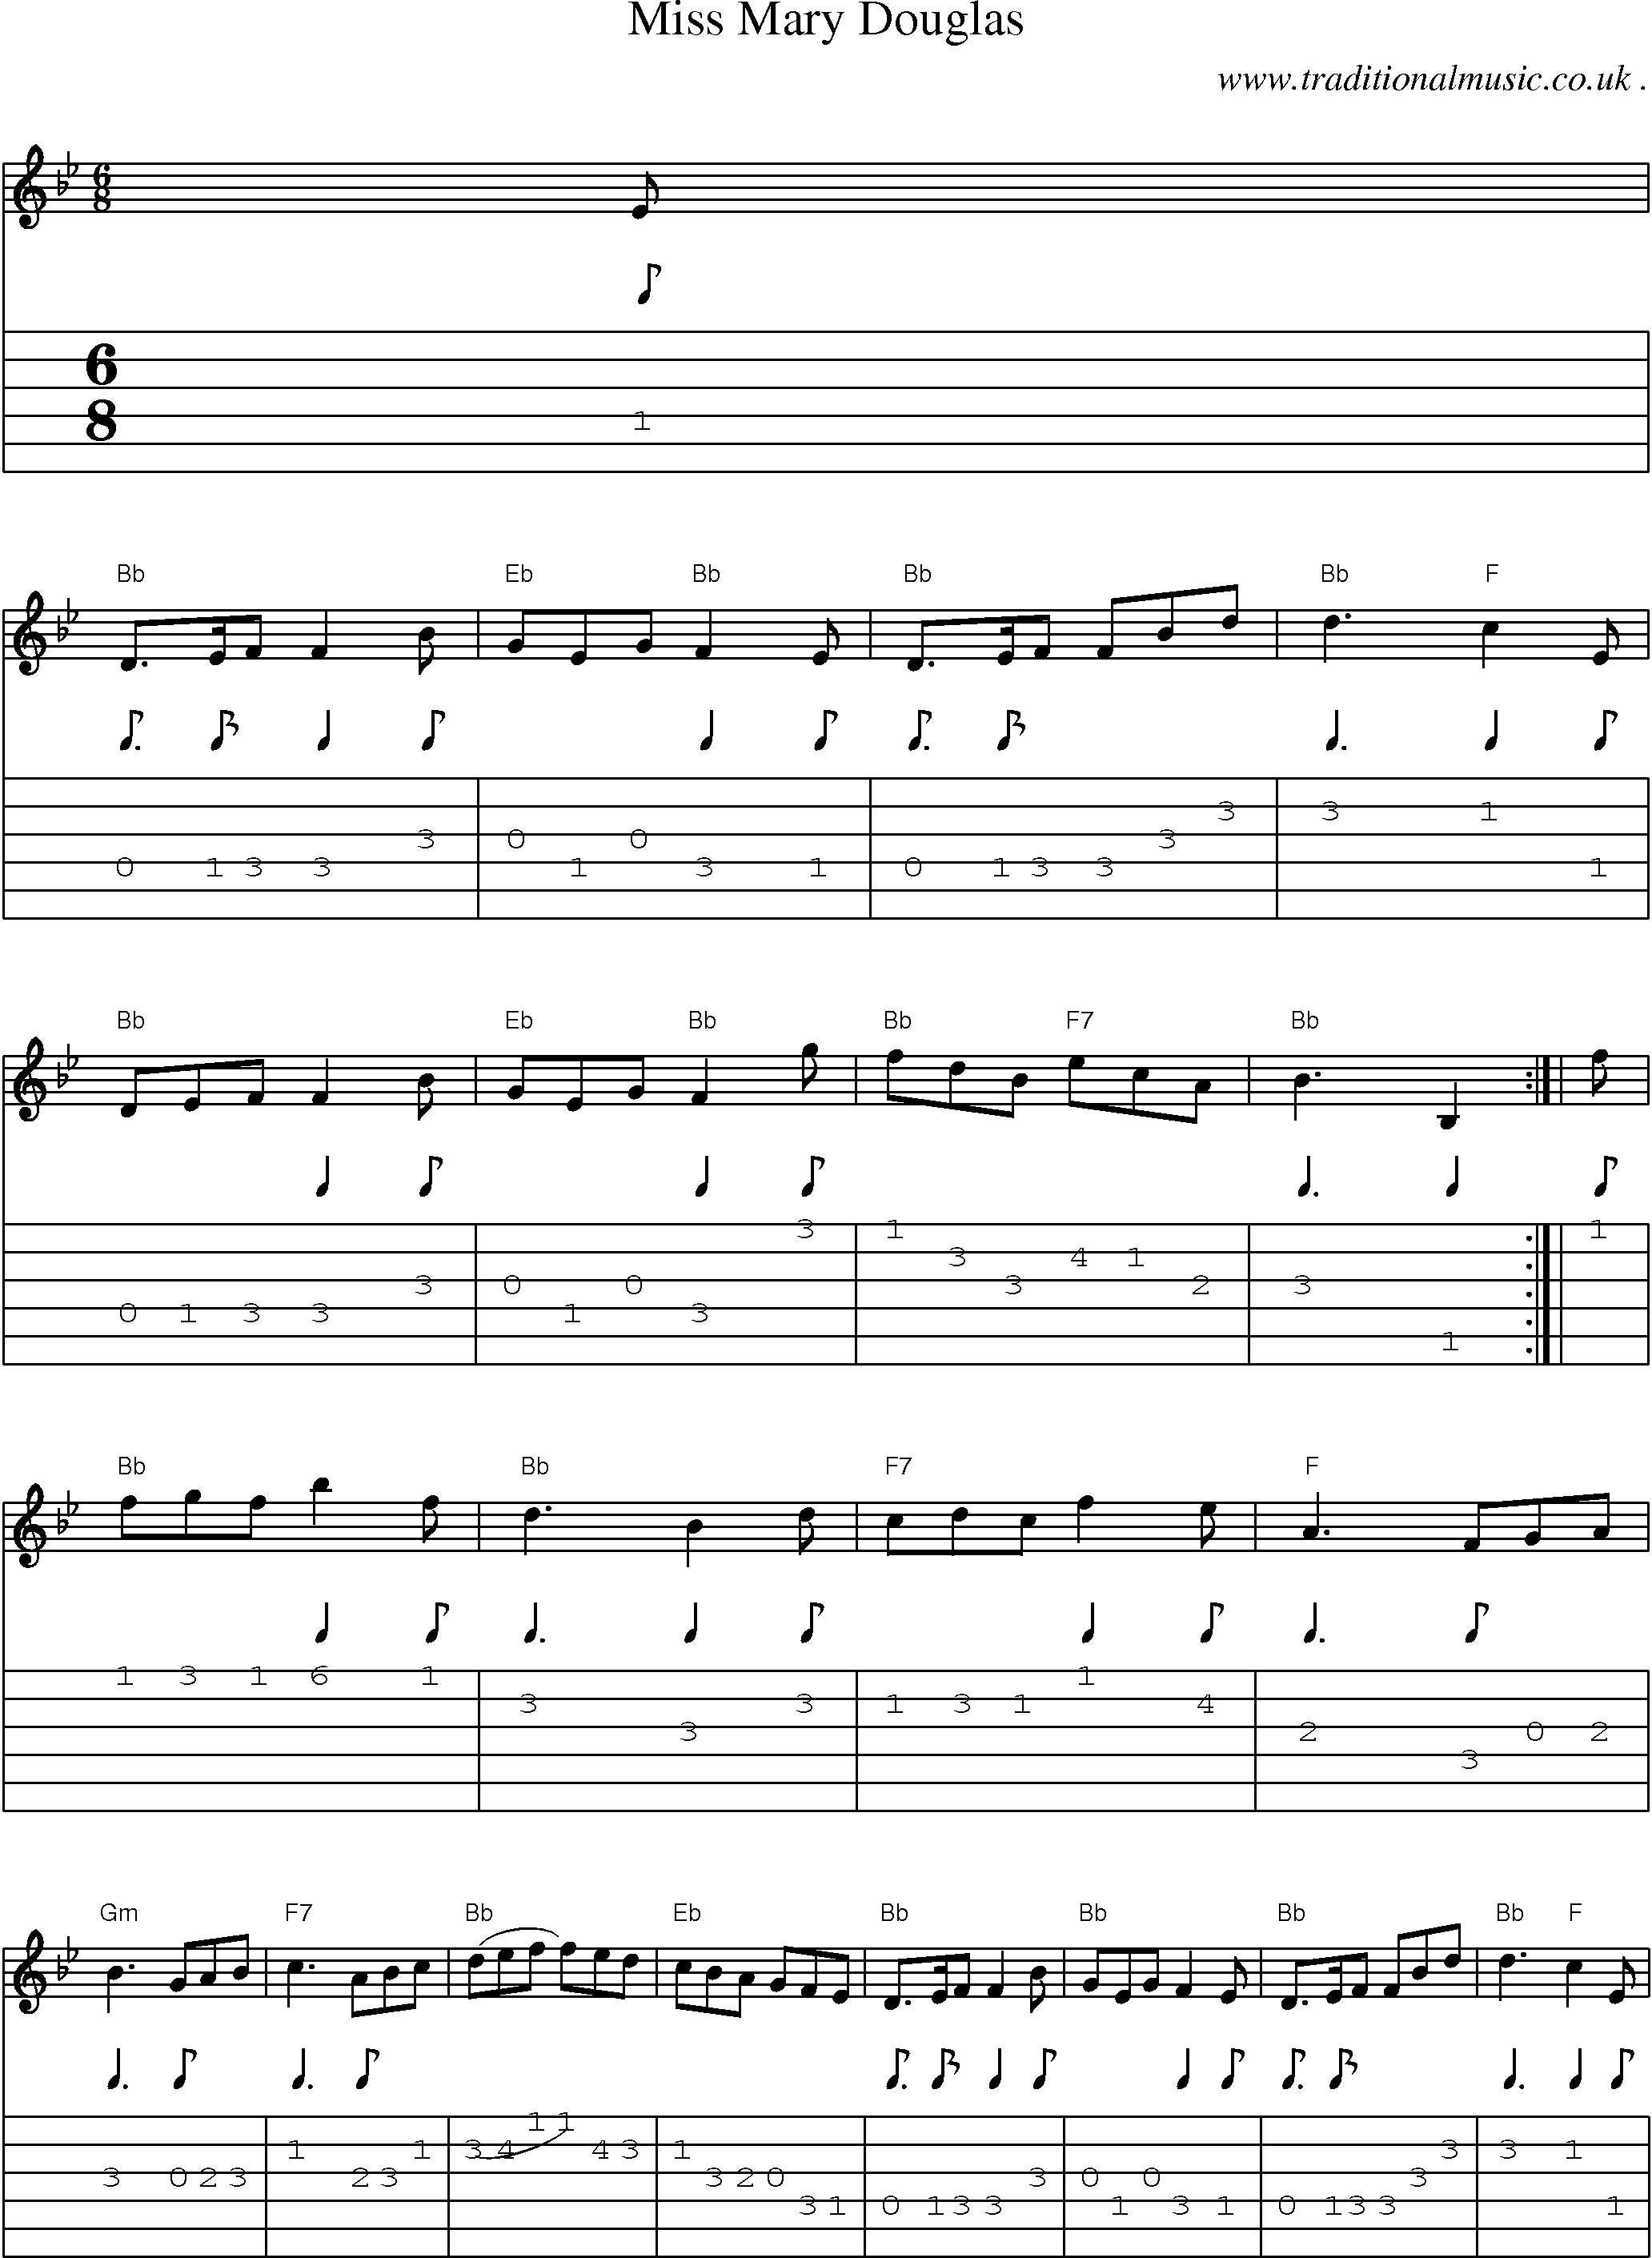 Sheet-music  score, Chords and Guitar Tabs for Miss Mary Douglas